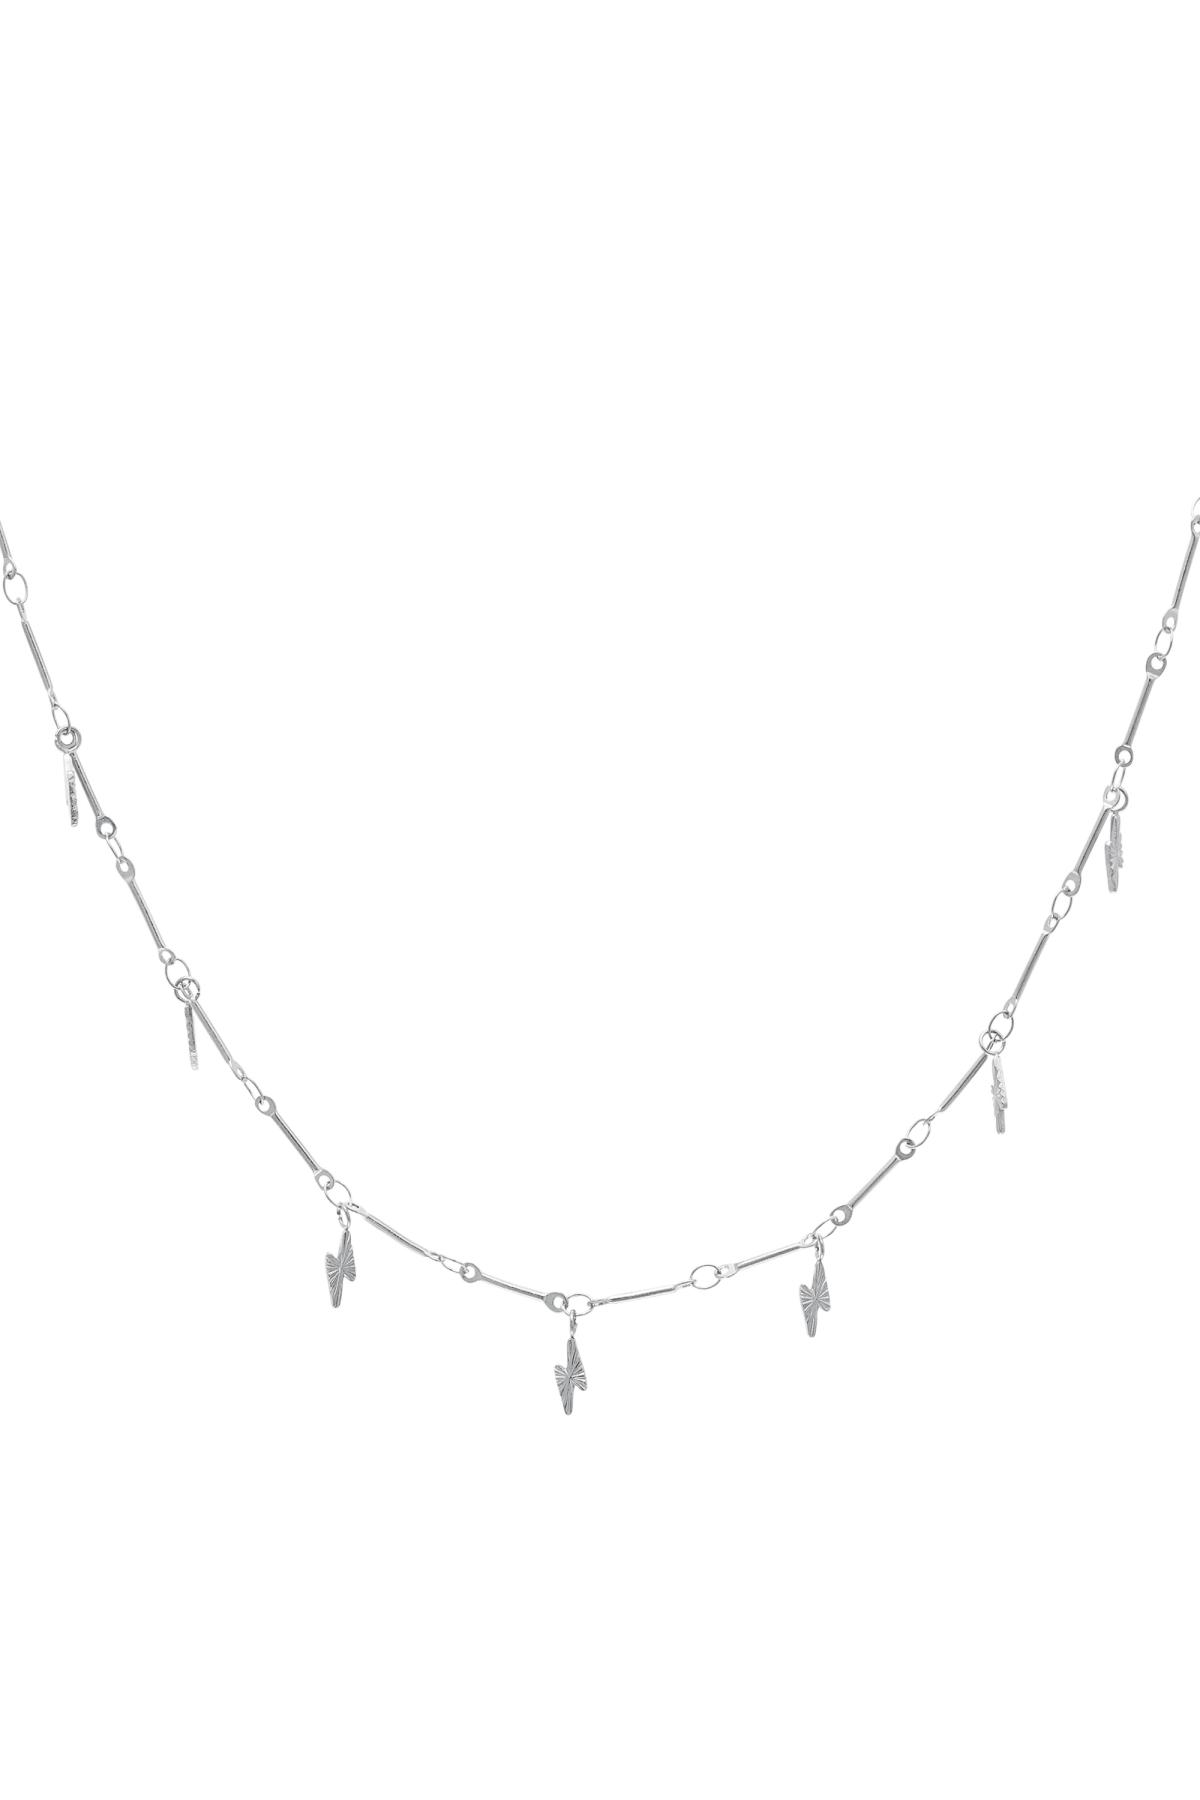 Stainless steel necklace lightning bolt Silver